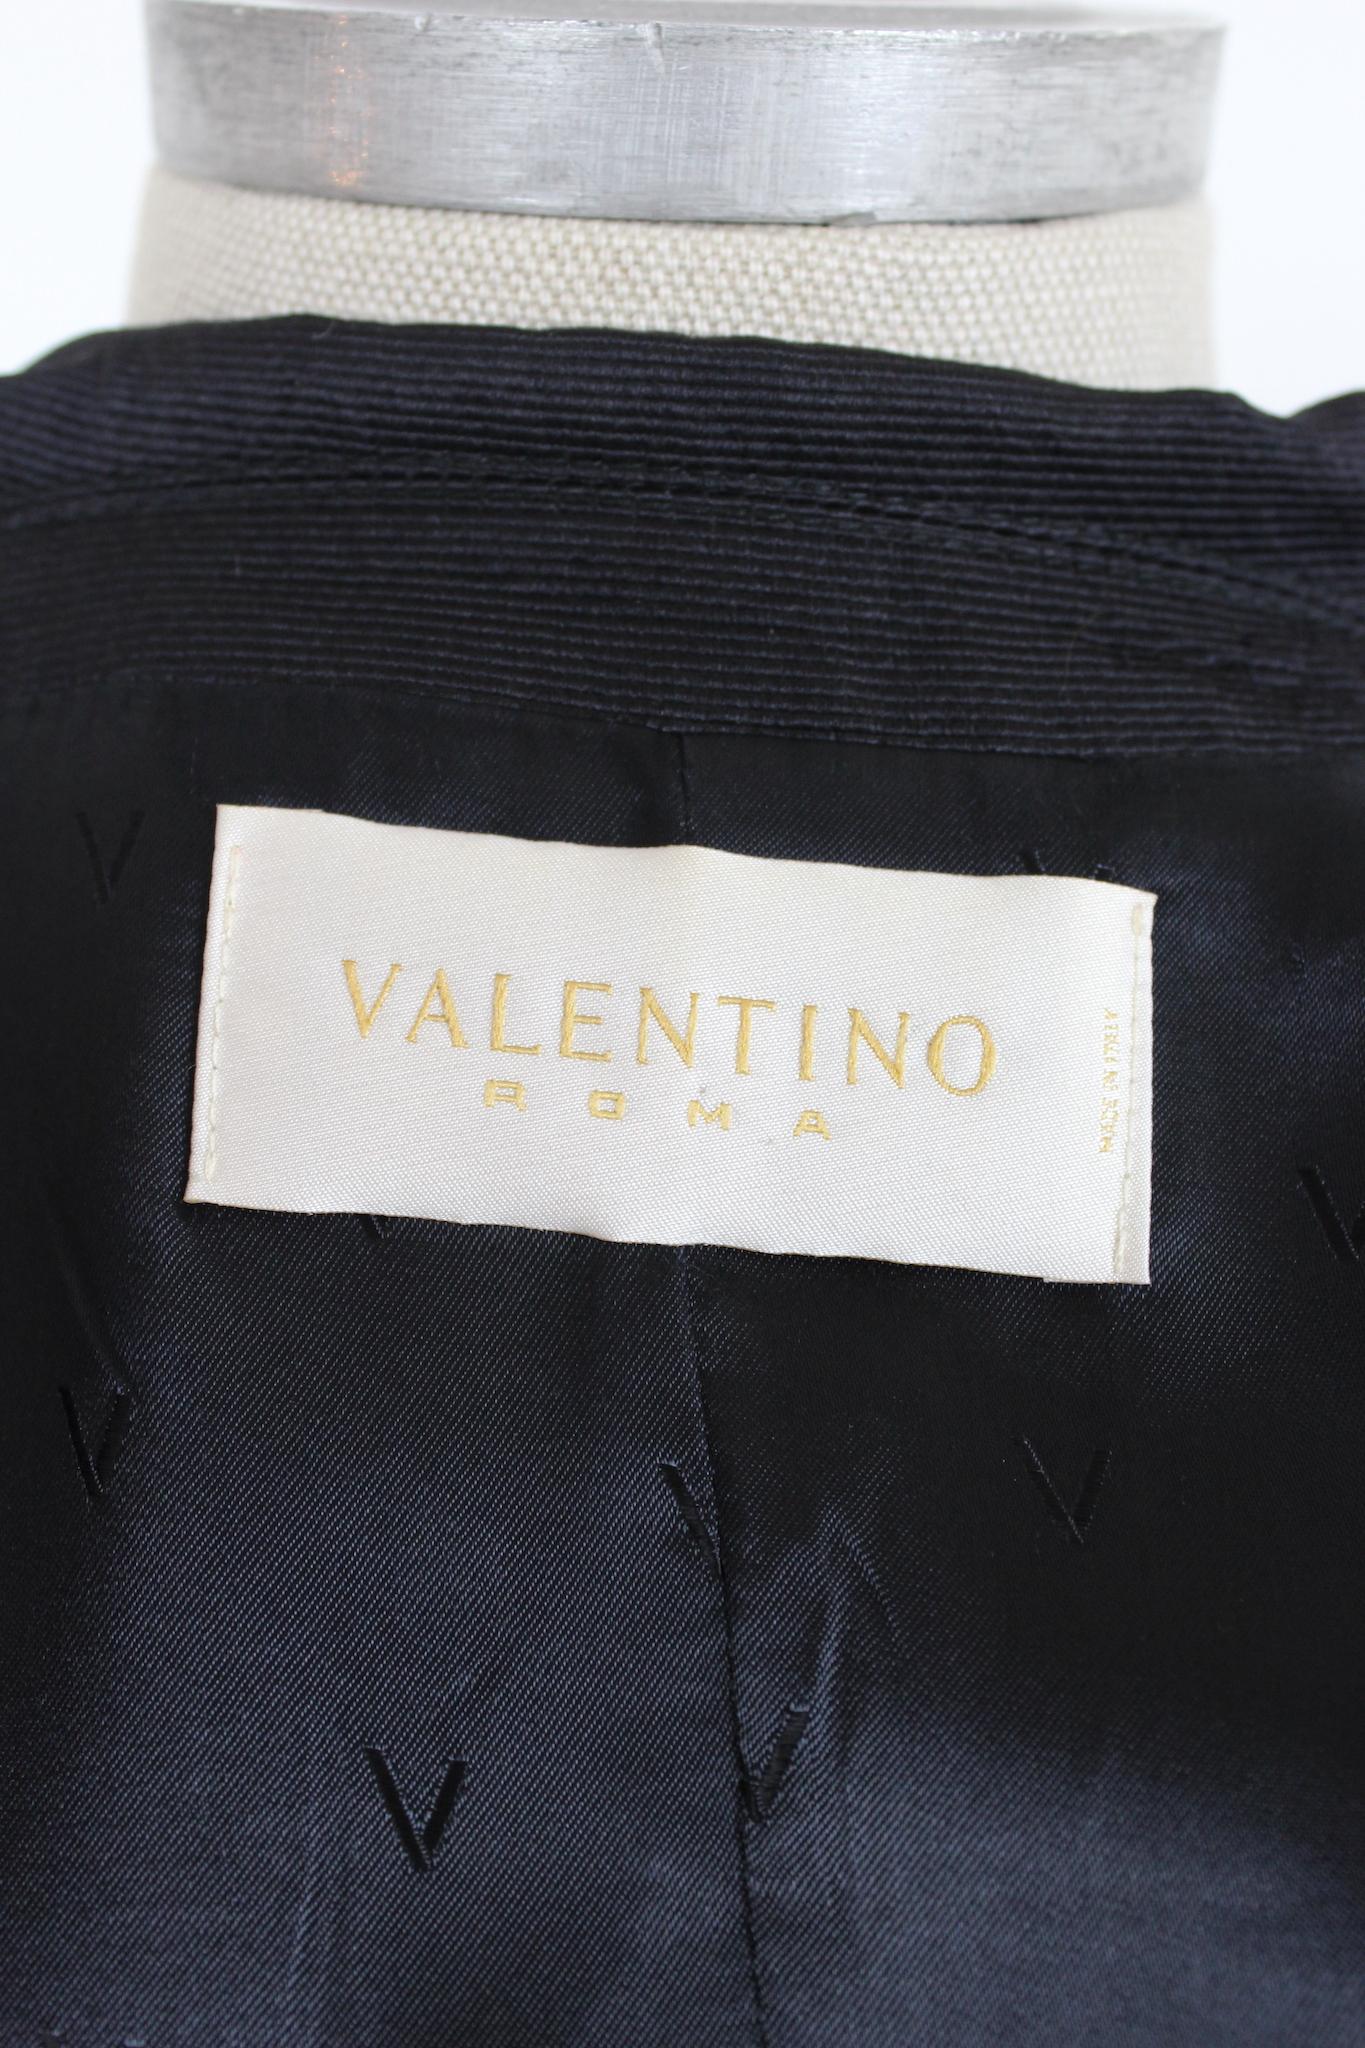 This shiny black Valentino jacket is elegant and refined. The slim fit design and elasticated waistband offer a flattering and comfortable fit, making it perfect for any evening event. The glossy black color is timeless. This jacket is from the